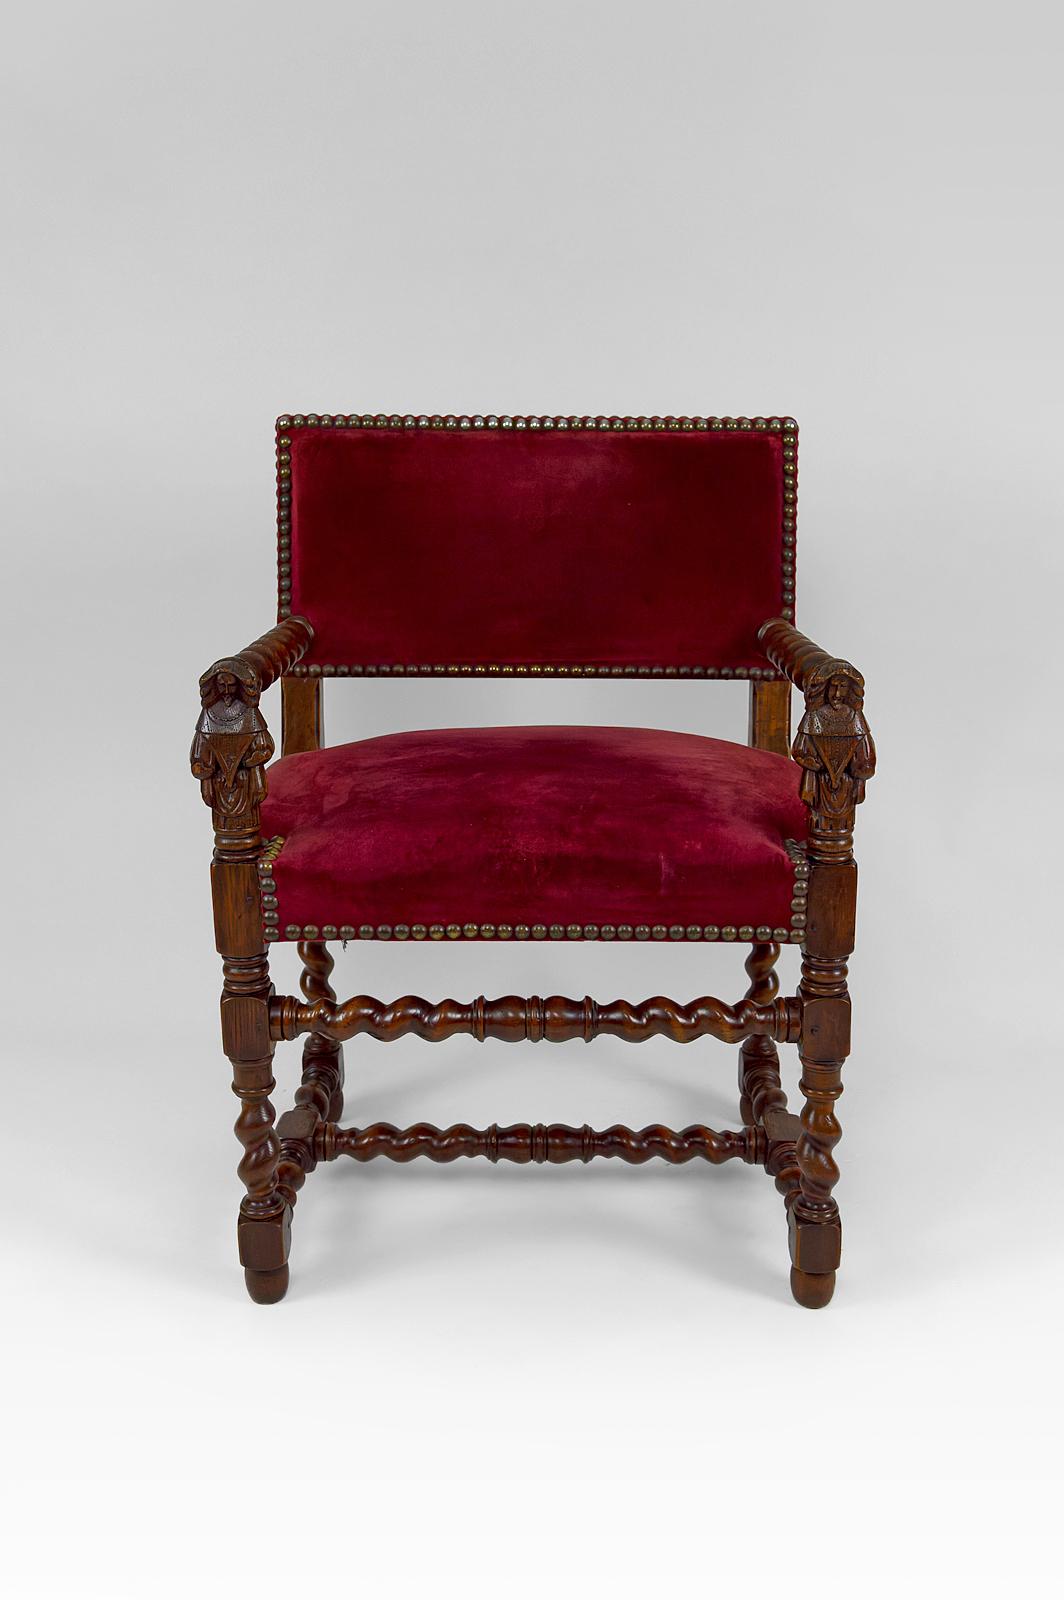 Beautiful Louis XIII / Haute Epoque style armchair with sculpted women on the armrests.
Late 19th century.

Most certainly inspired by a pair of armchairs circa 1640 kept at the Louvre in the collection department of Art Objects of the Middle Ages,